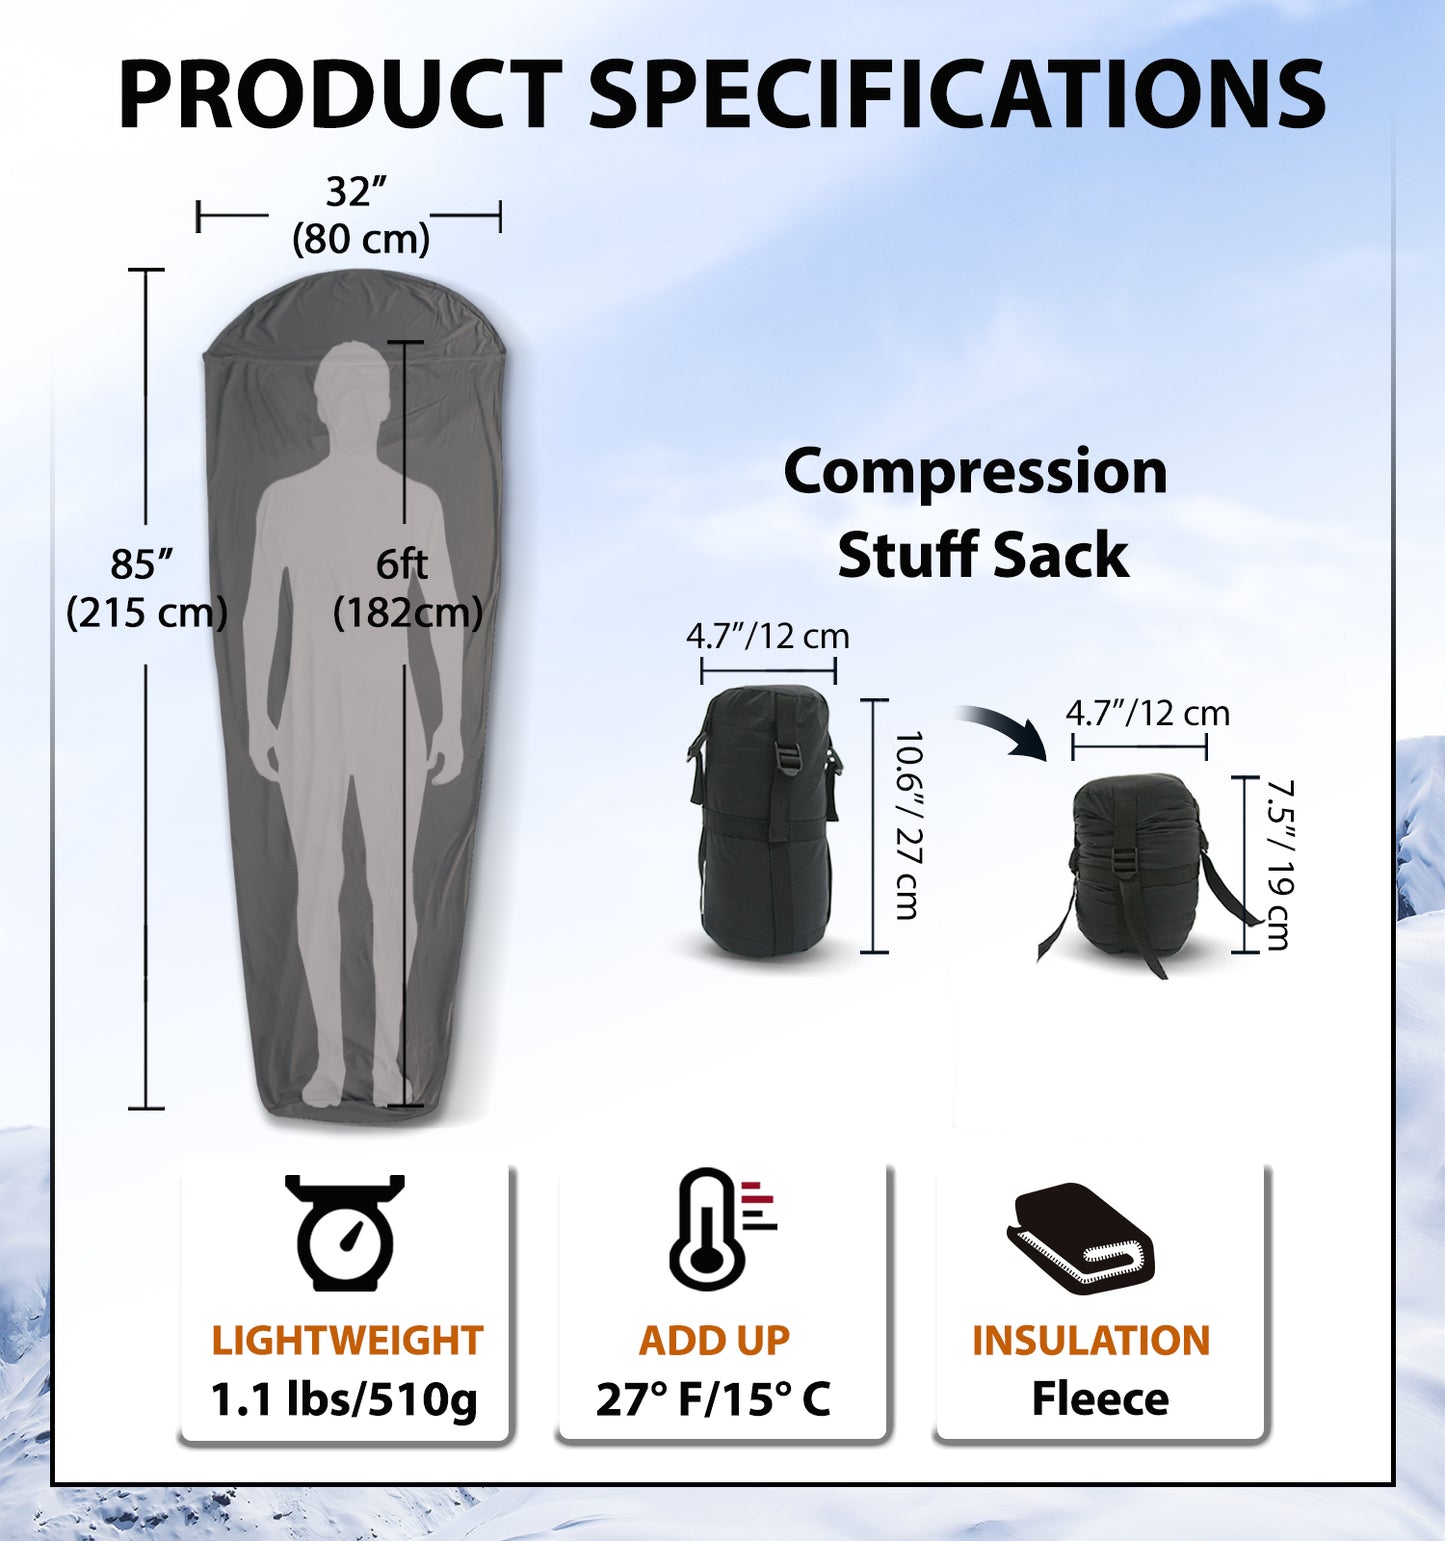 seatosummit All Season Sleeping Bag Liner Adds Up to 27F 15C warmth Lightweight Mummy Sleeping Sack for Backpacking Camping litume winter cold weather super warm hiking backpacker train airplane travel snow hostal hood